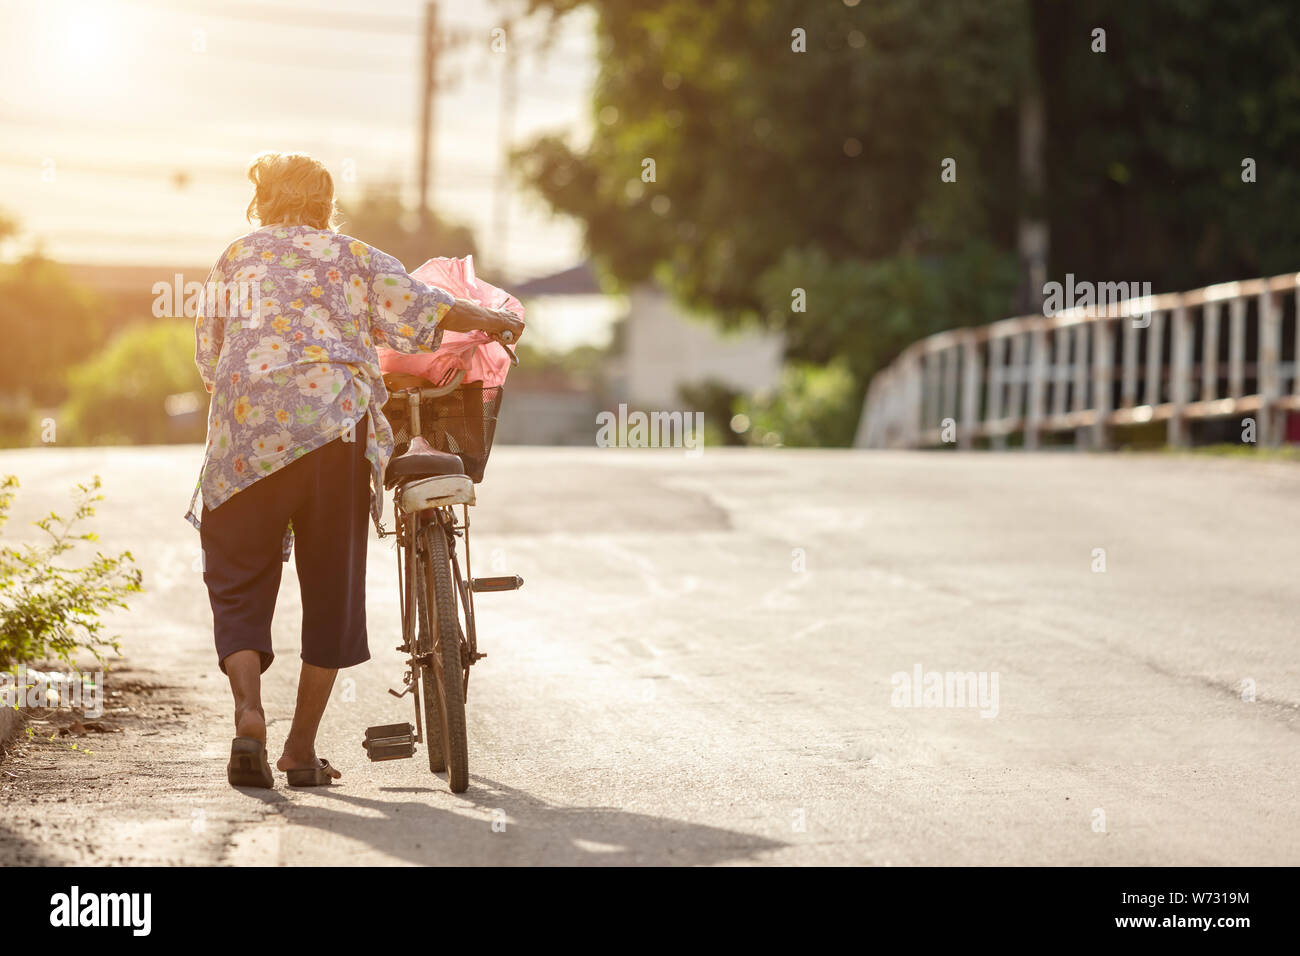 The grandmother walking with old bicycle on the street. Retire but no one take care concept Stock Photo